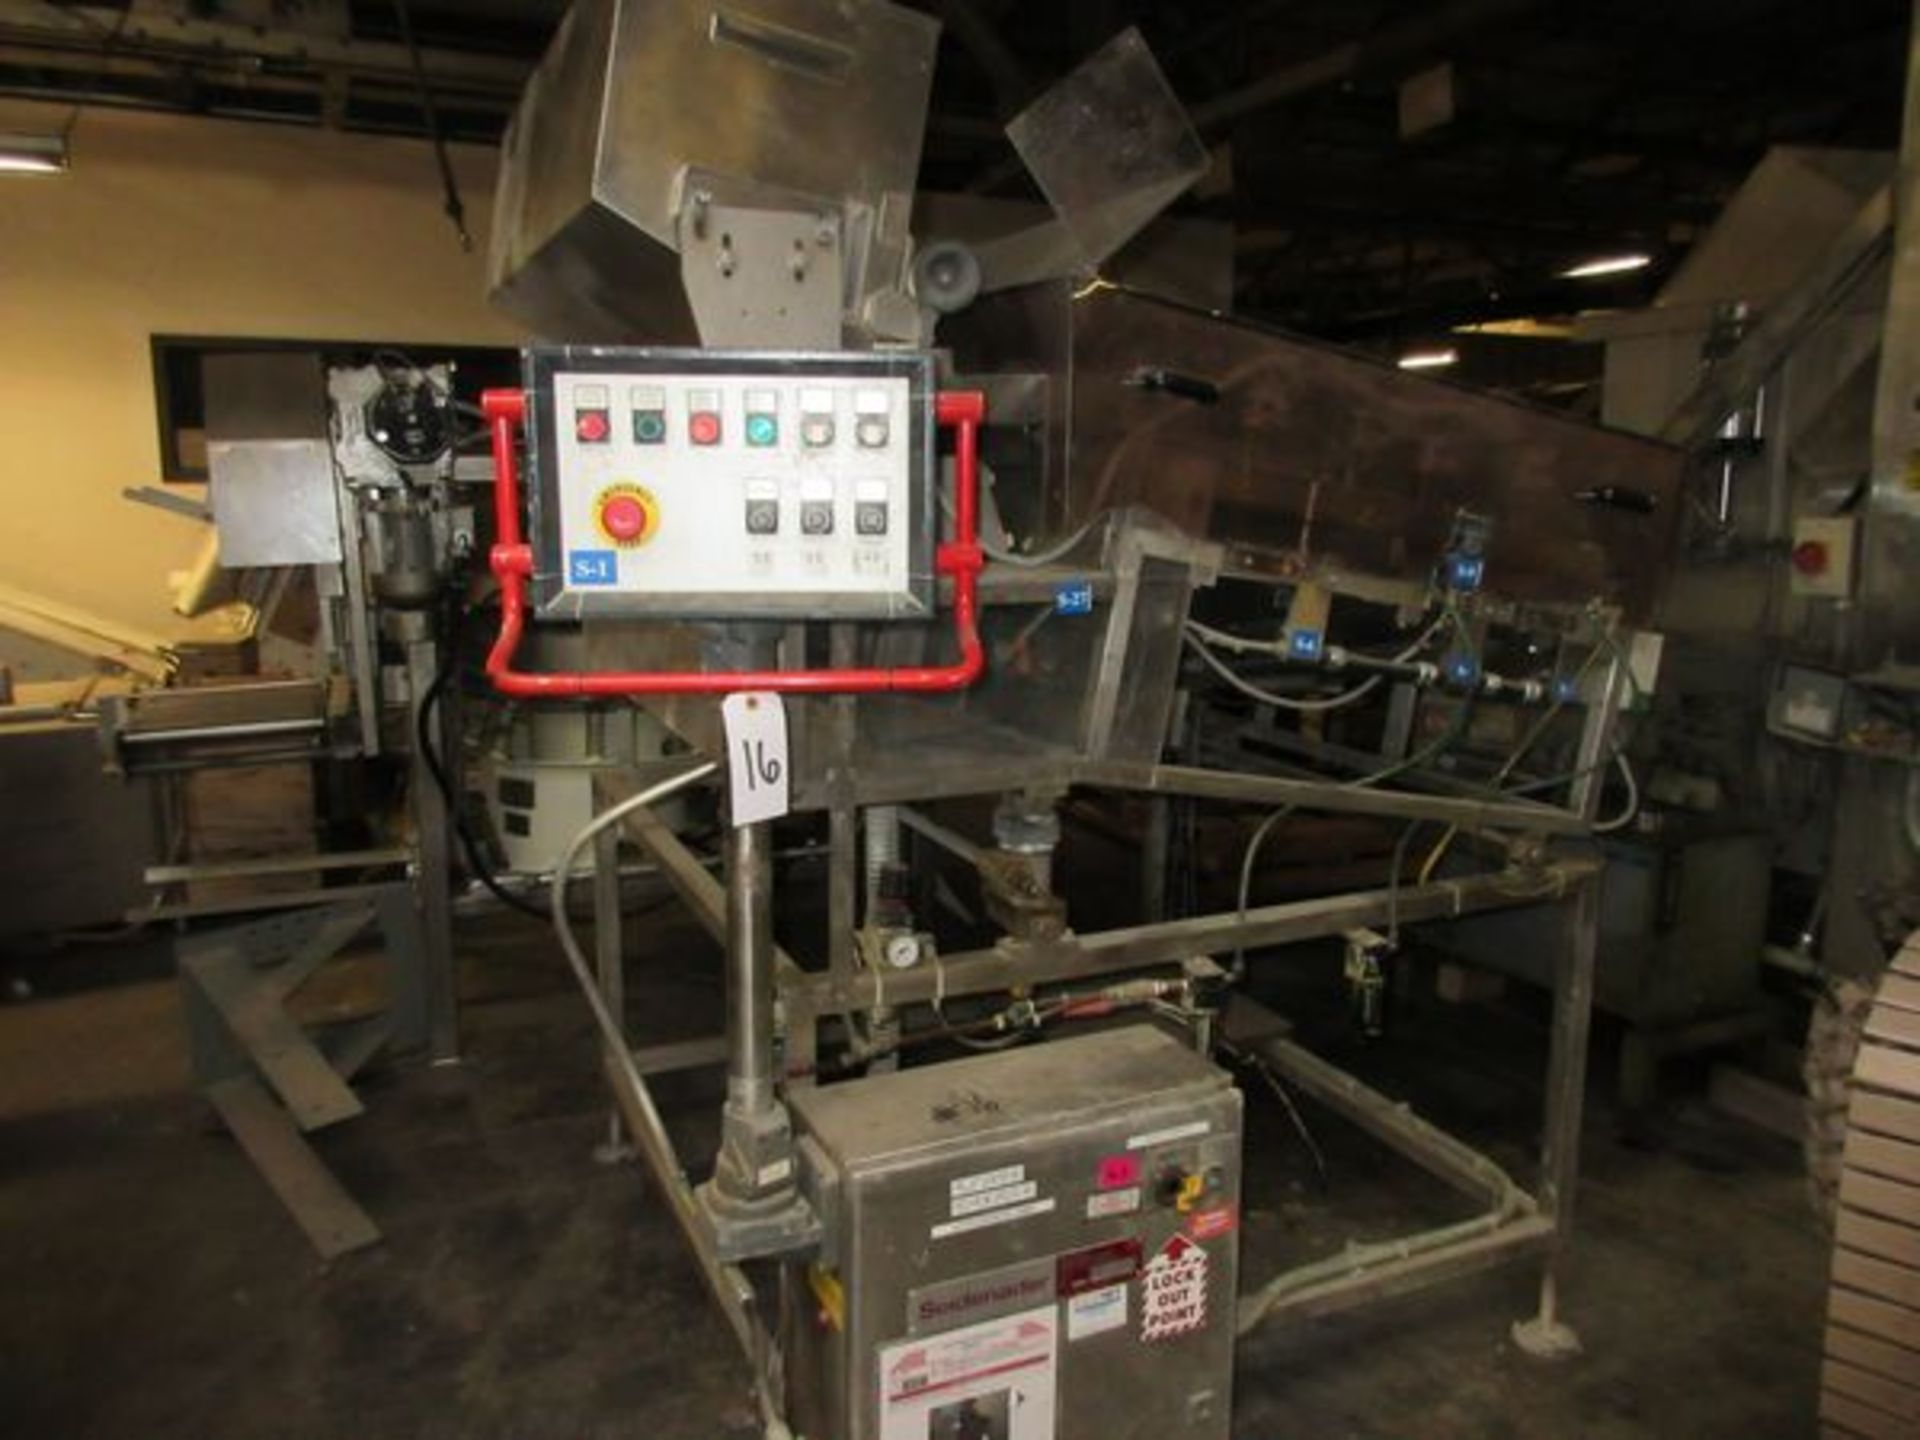 2002 Seidenader Type DS-12 Vibratory Sorter, s/n 20402A Used at Wrigley Gum (Site Ta | Rig Fee $75